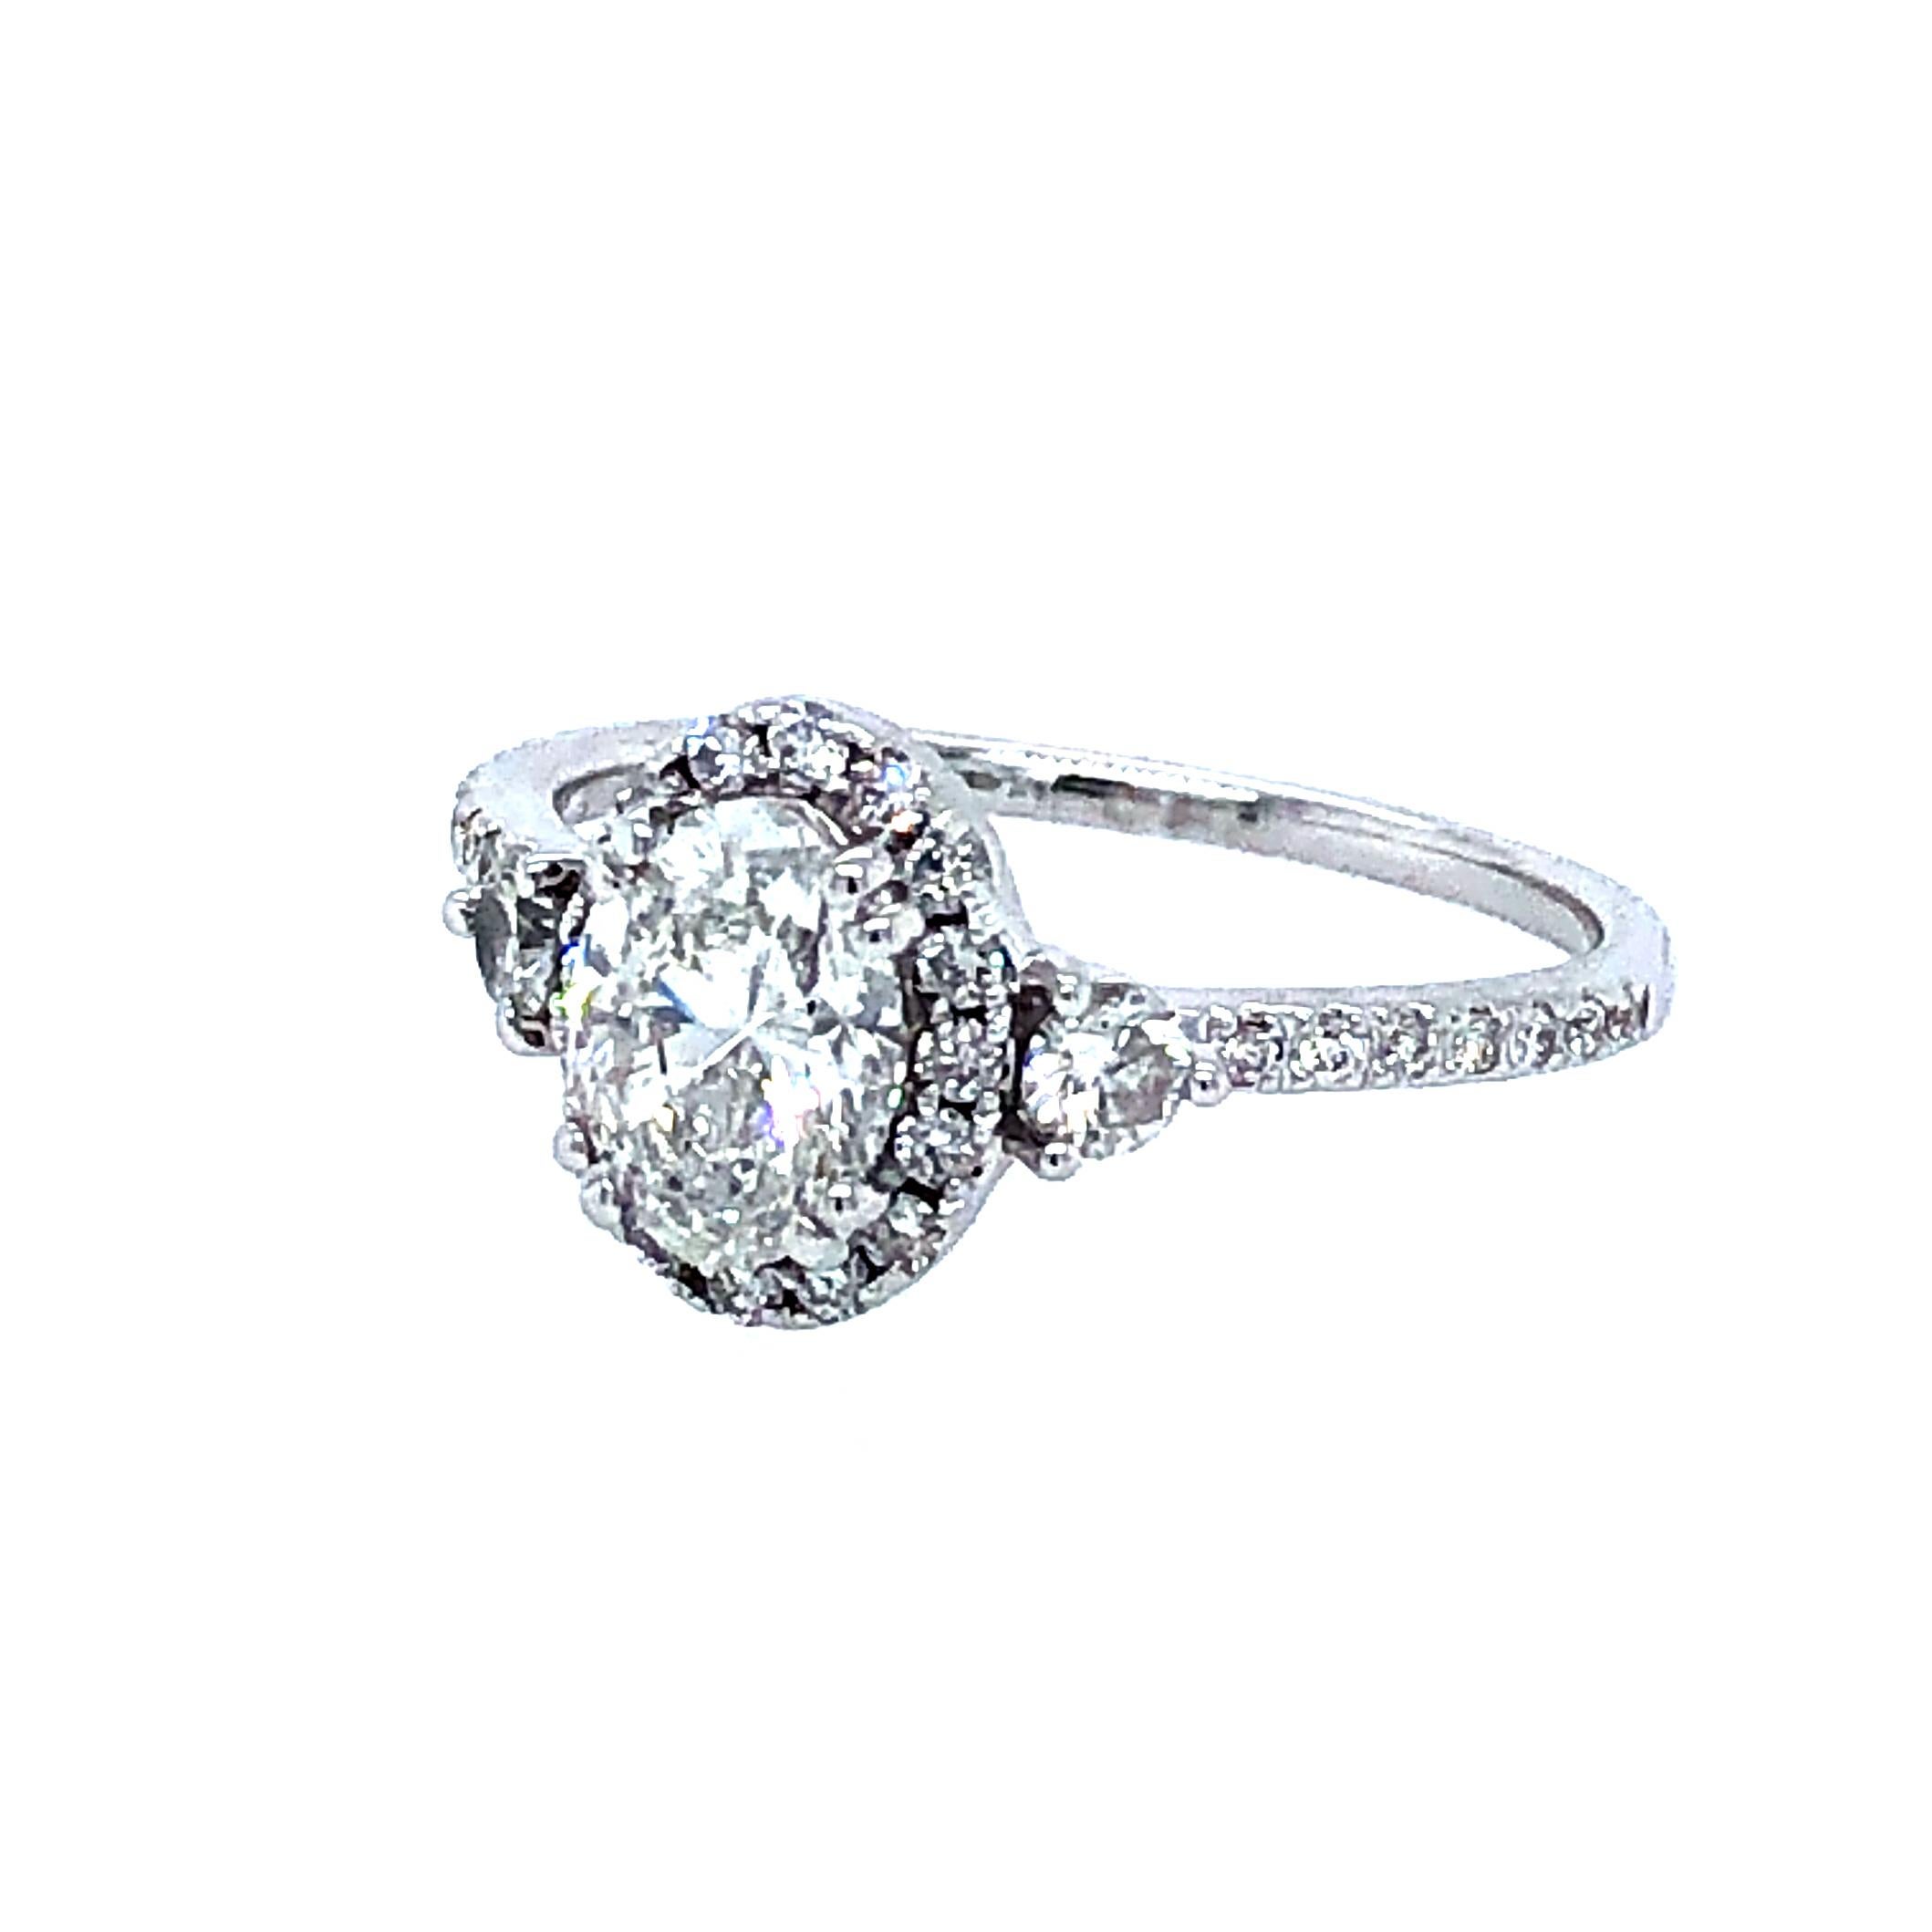 Offered here is a classic oval shape diamond engagement ring set in 14kt white gold. The center diamond is GIA certified 0.91 carat G color Si2 clarity, excellent, very good and no fluorescent. The ring has H color Vs2 clarity round brilliant cut